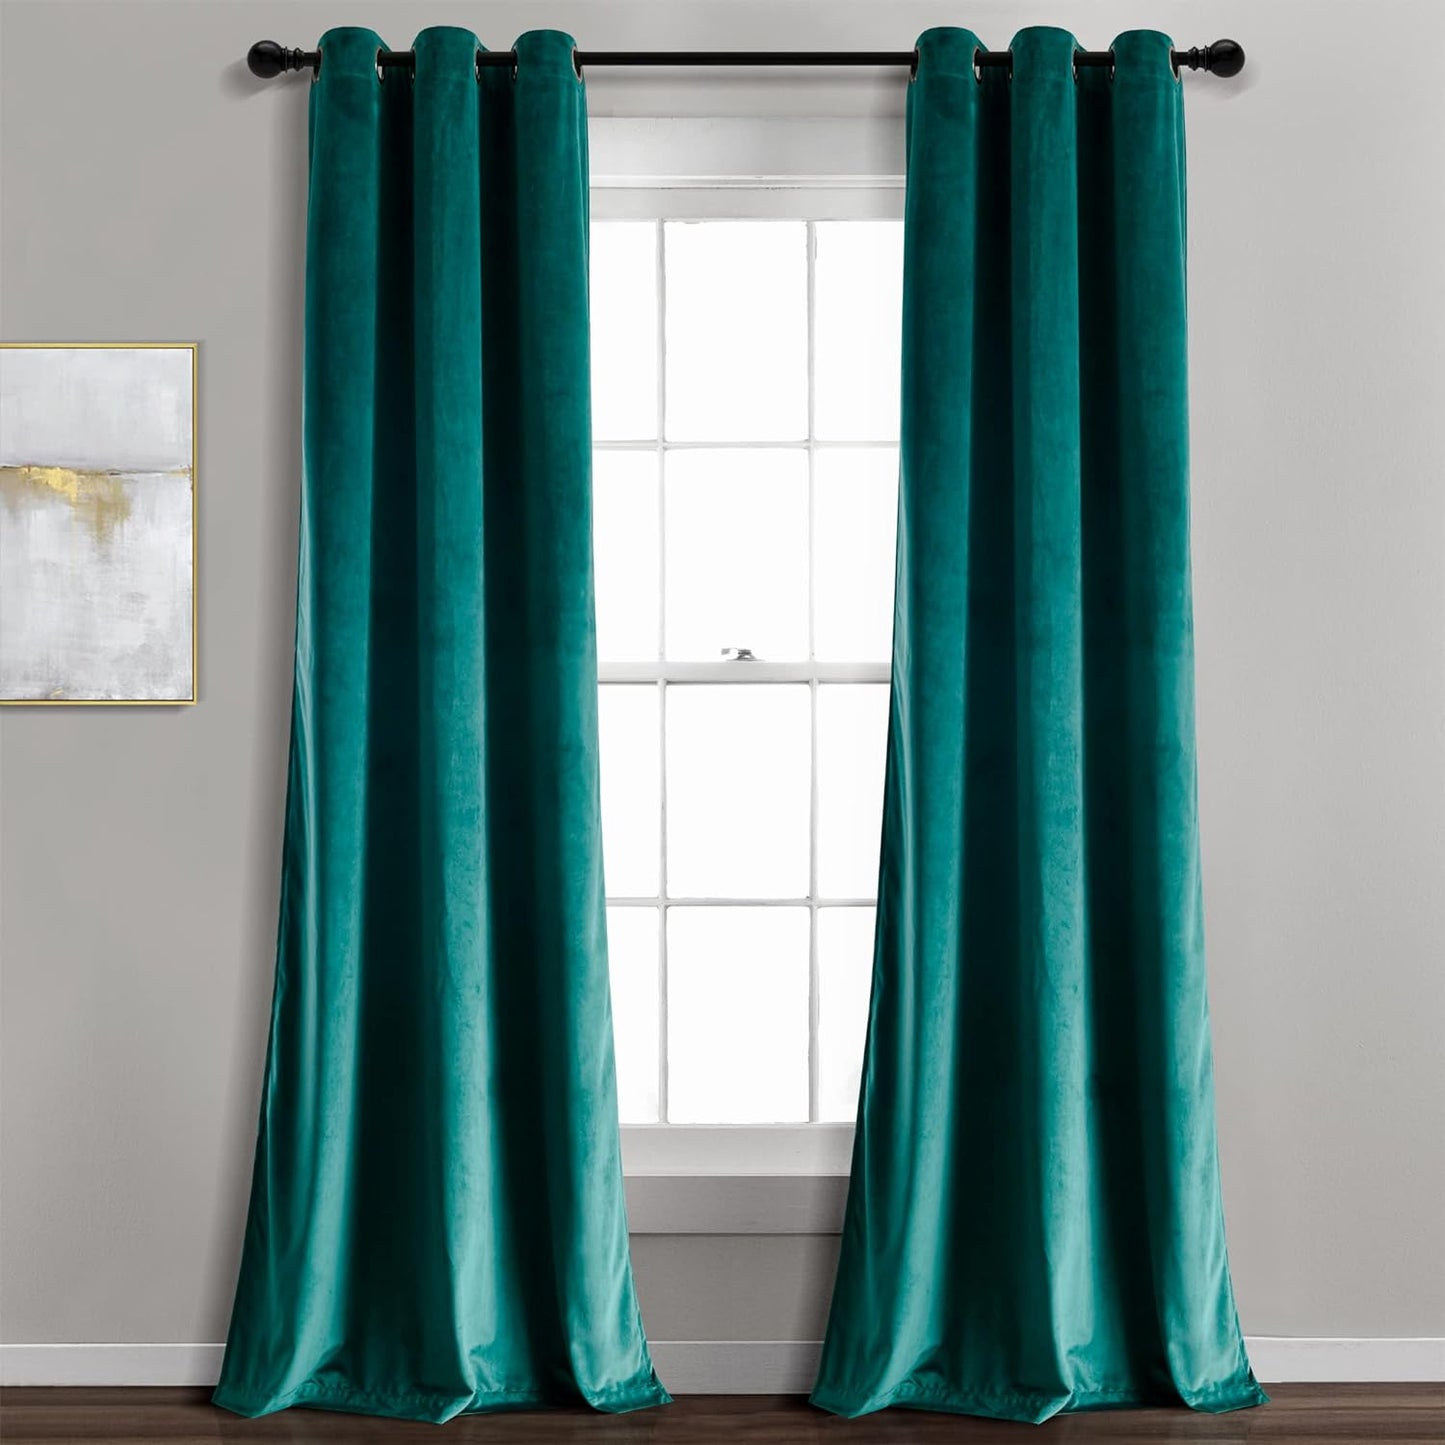 Lush Decor Prima Velvet Curtains Color Block Light Filtering Window Panel Set for Living, Dining, Bedroom (Pair), 38" W X 84" L, Navy  Triangle Home Fashions Teal Green Room Darkening 38"W X 95"L